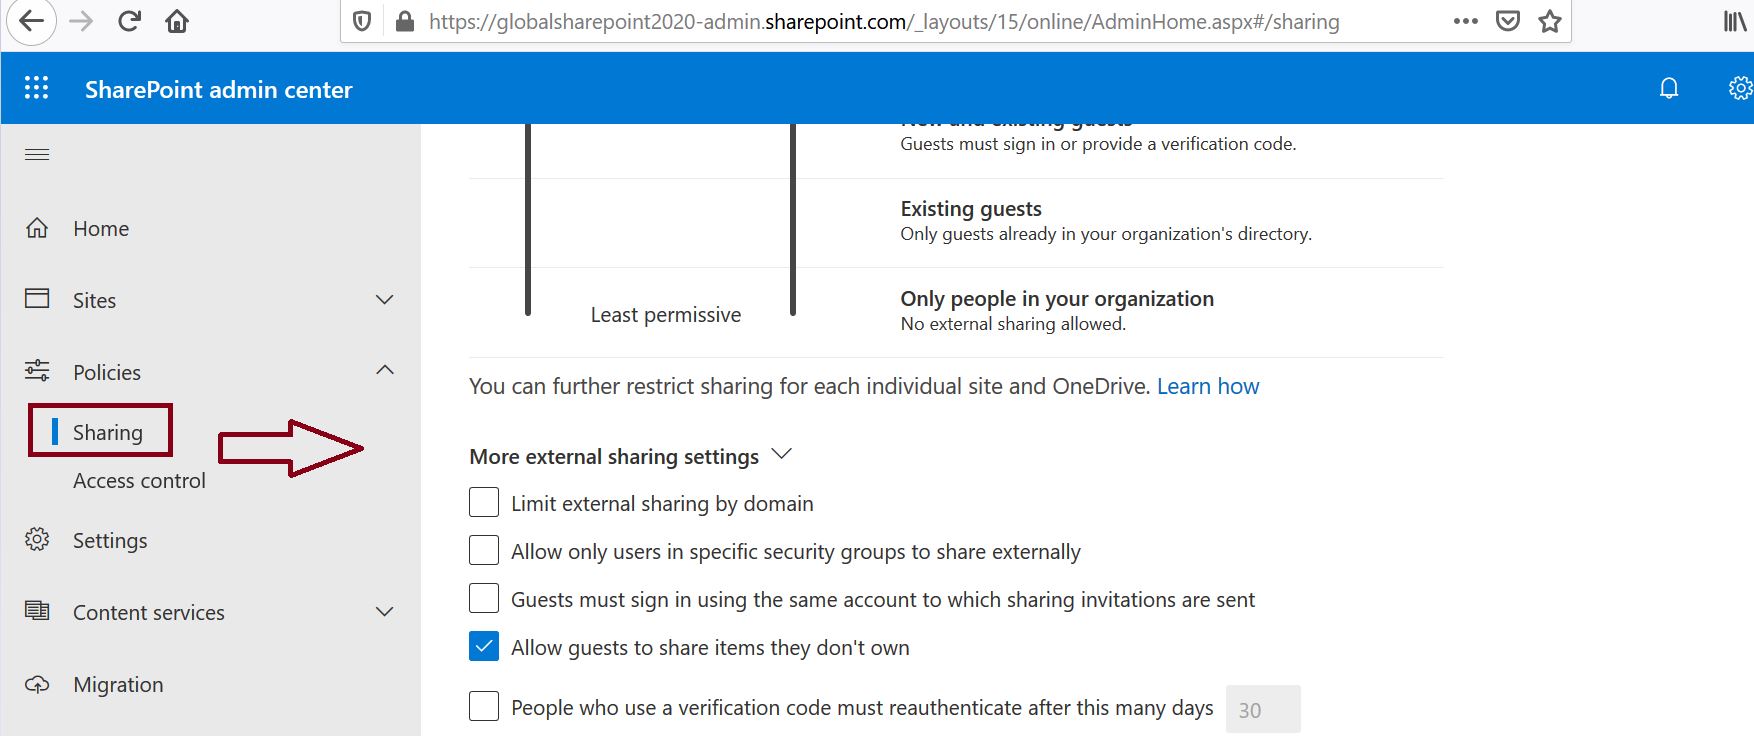 Guest access to SharePoint Online, More external sharing settings in Policy sharing settings